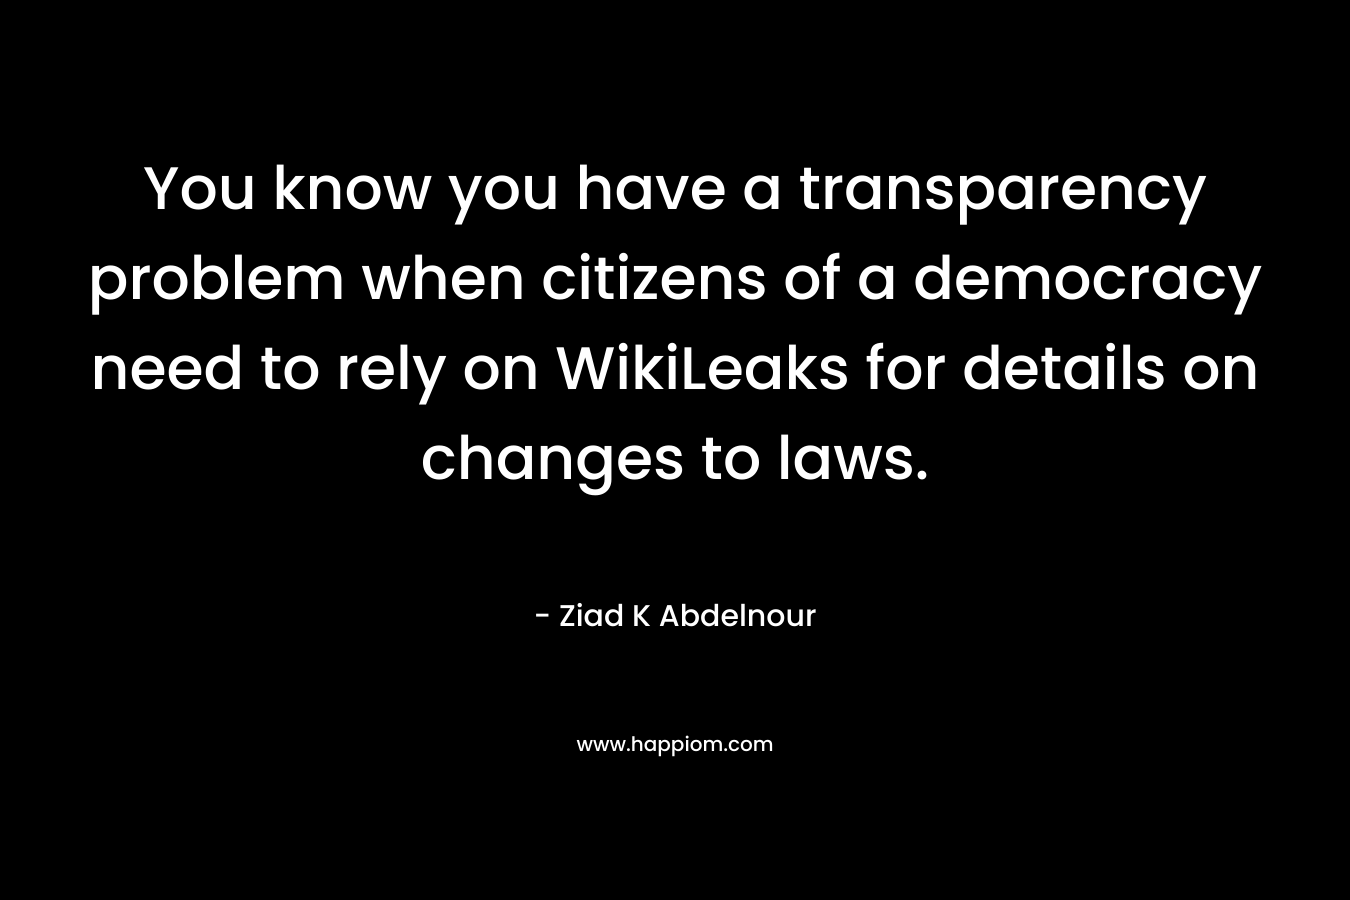 You know you have a transparency problem when citizens of a democracy need to rely on WikiLeaks for details on changes to laws. – Ziad K Abdelnour